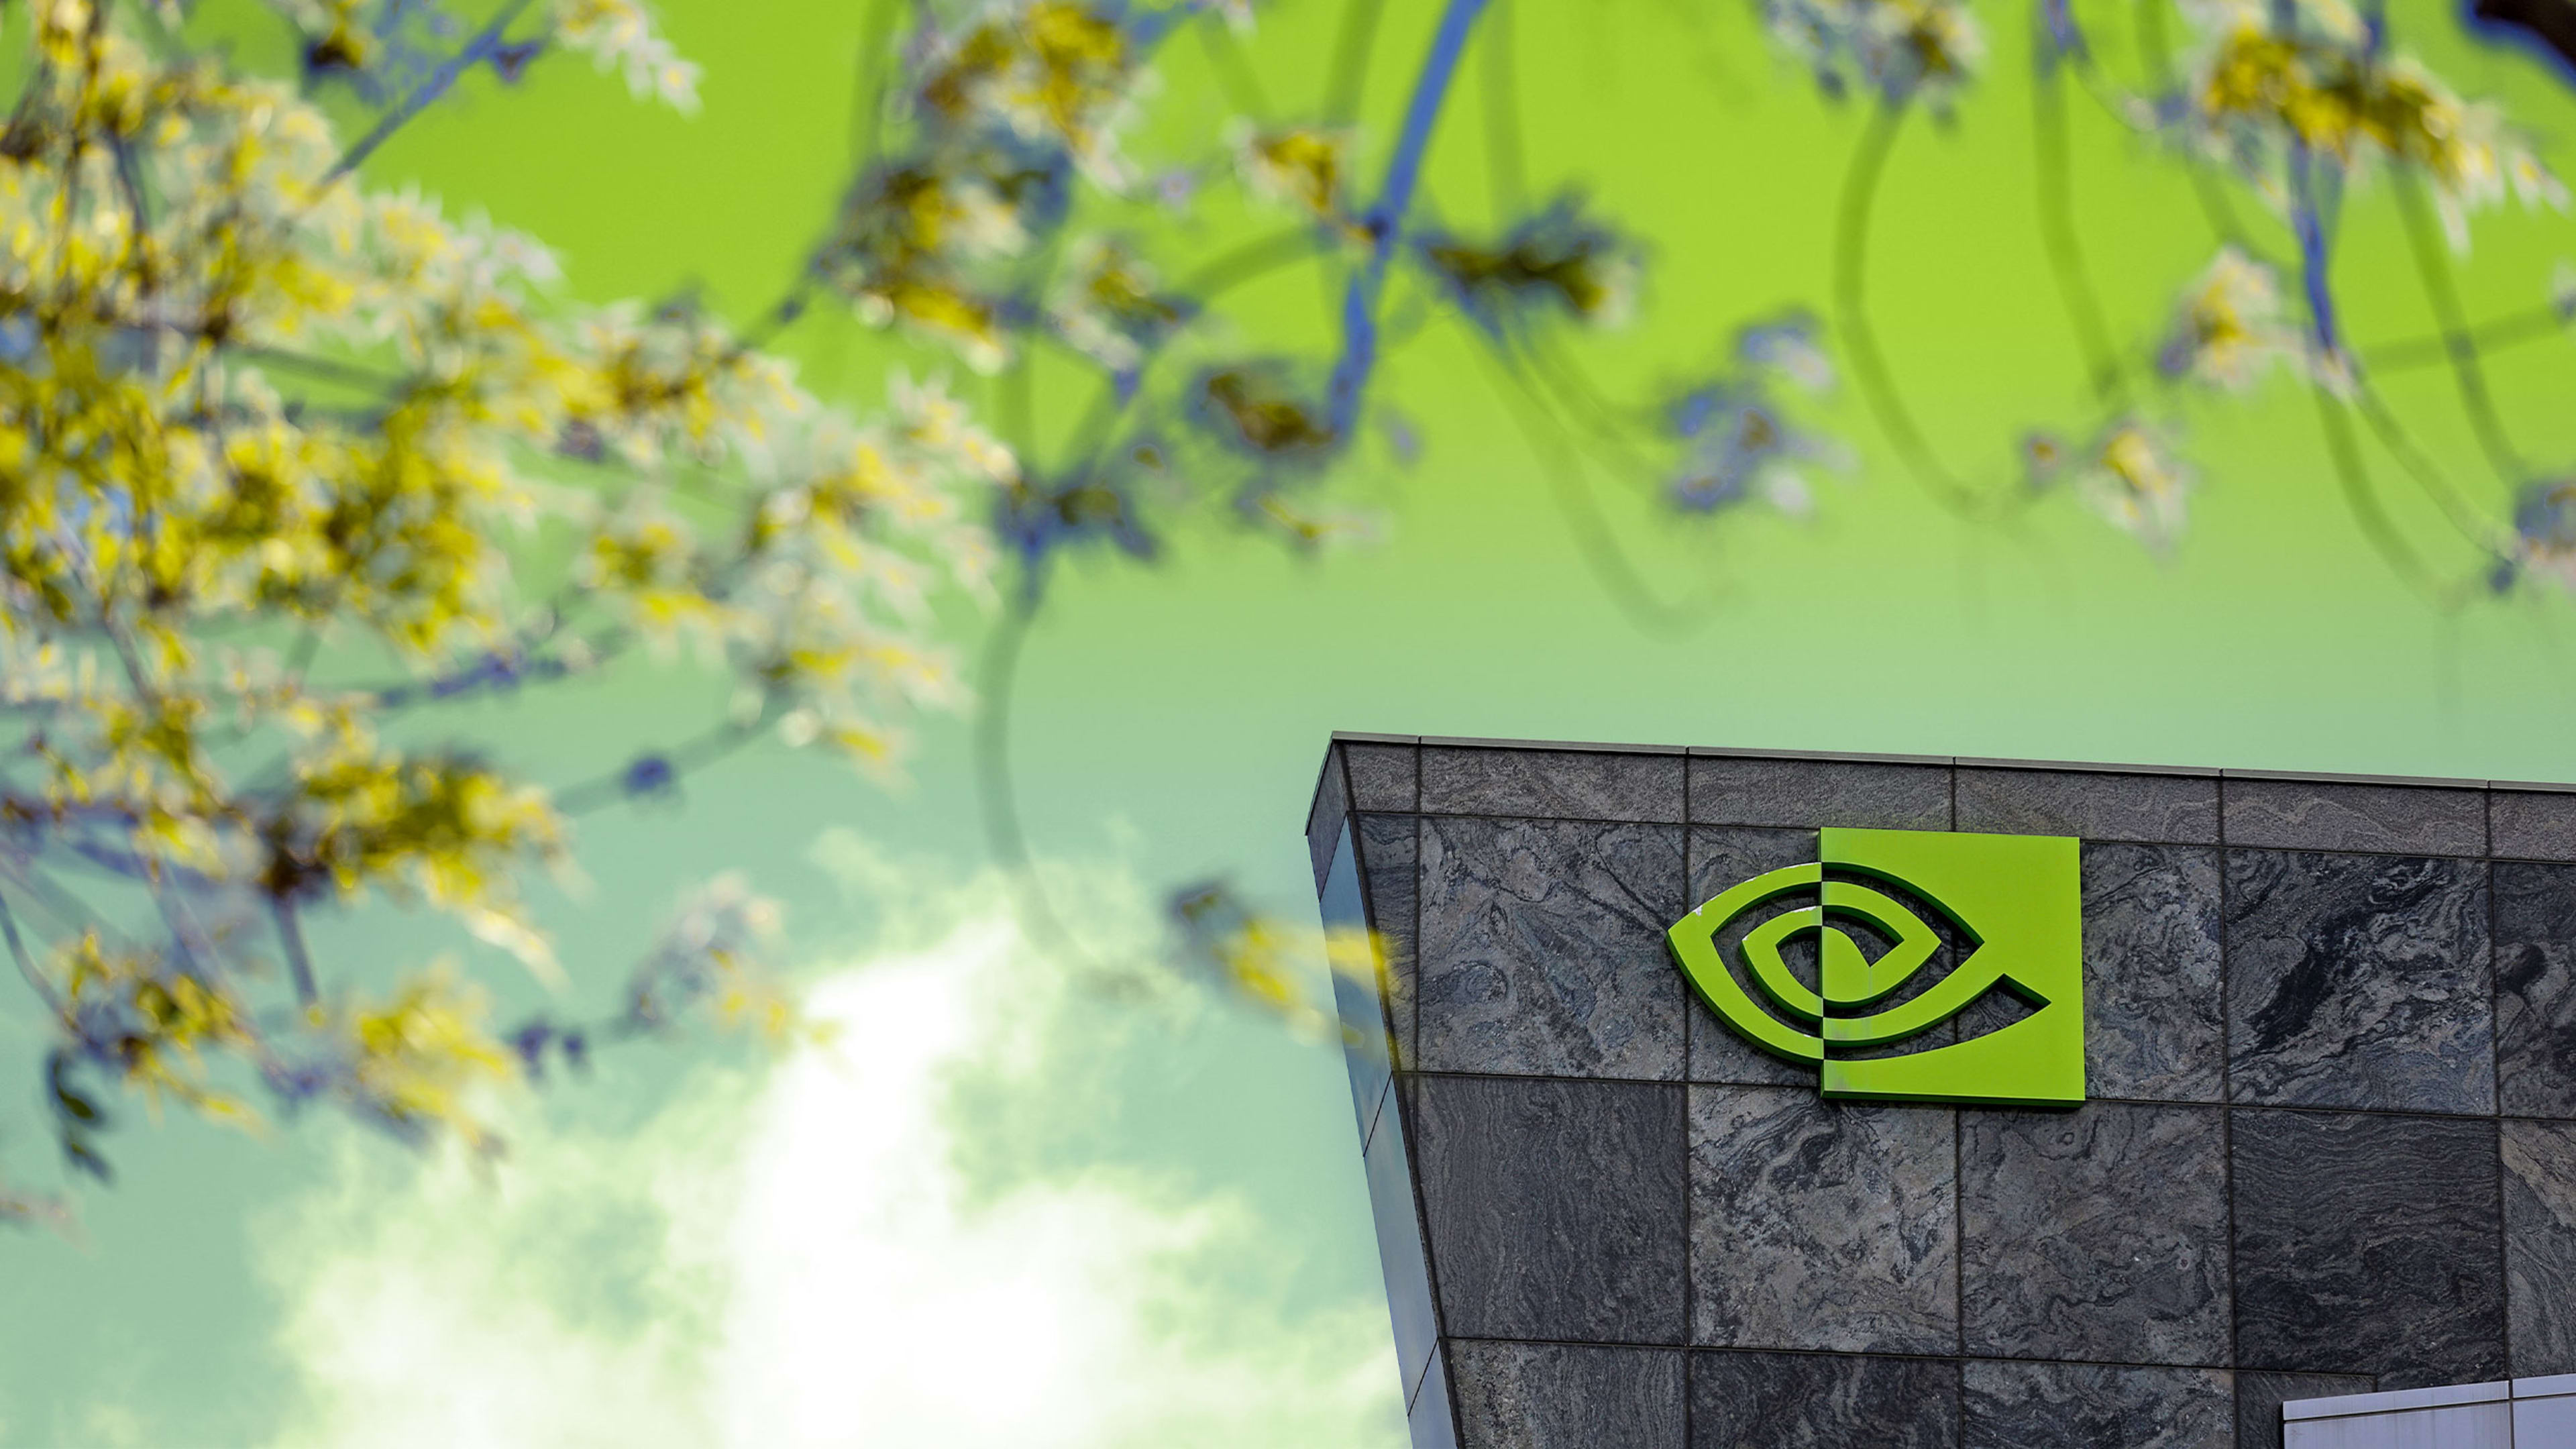 Nvidia stock price is surging thanks to ChatGPT and an expected boom in generative AI